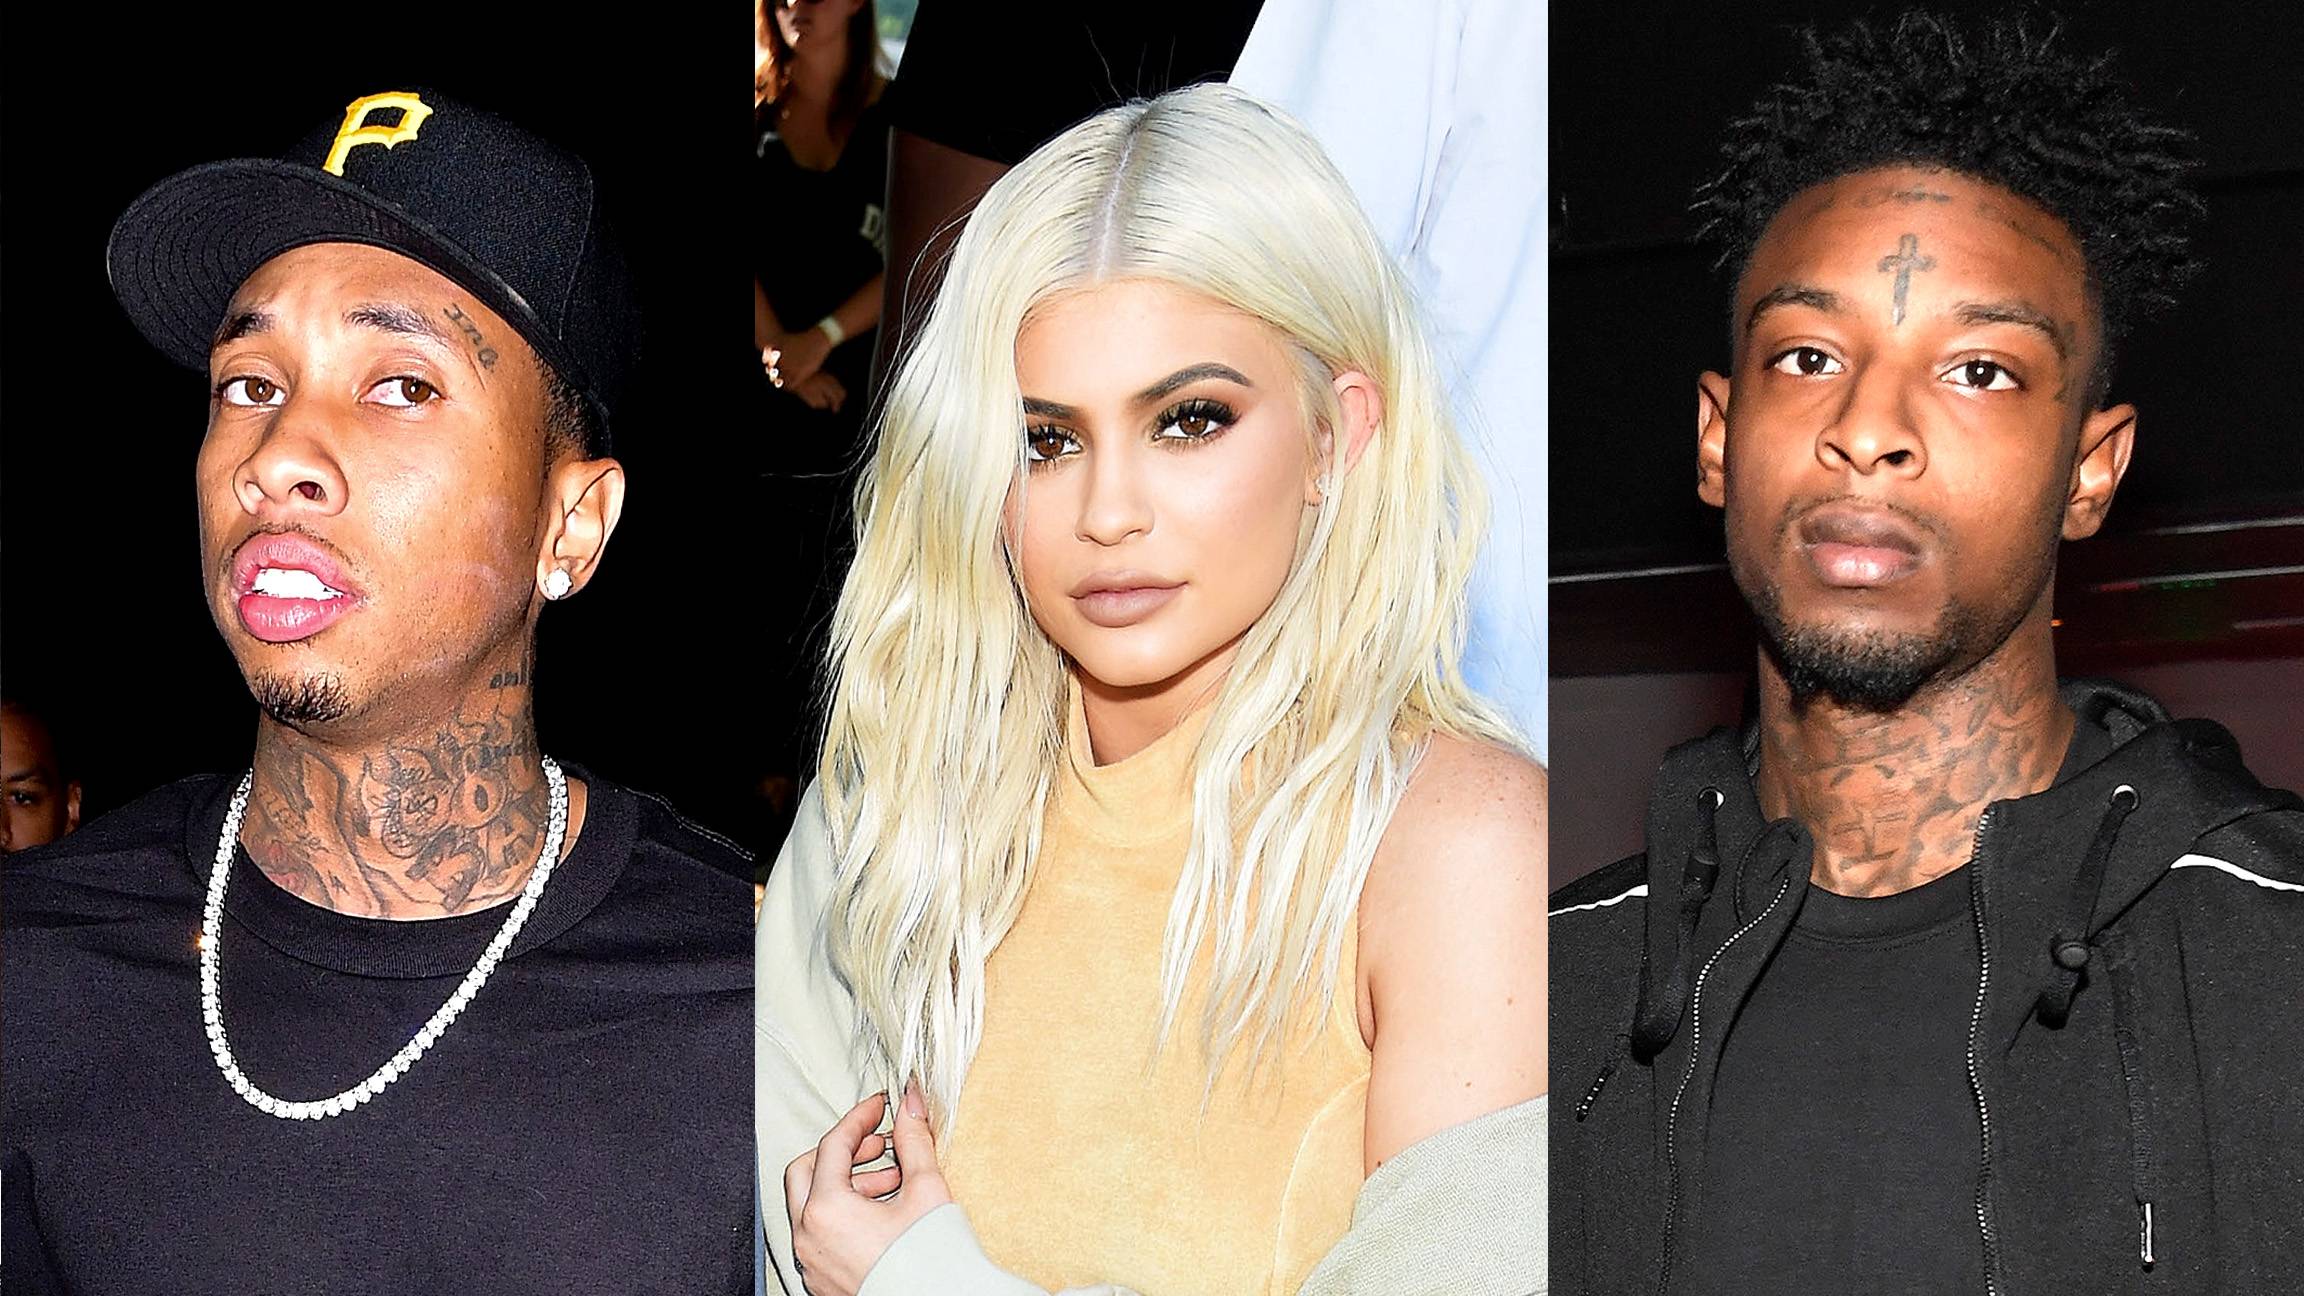 21 Savage Lives Up To His Name With Kylie Jenner Comments